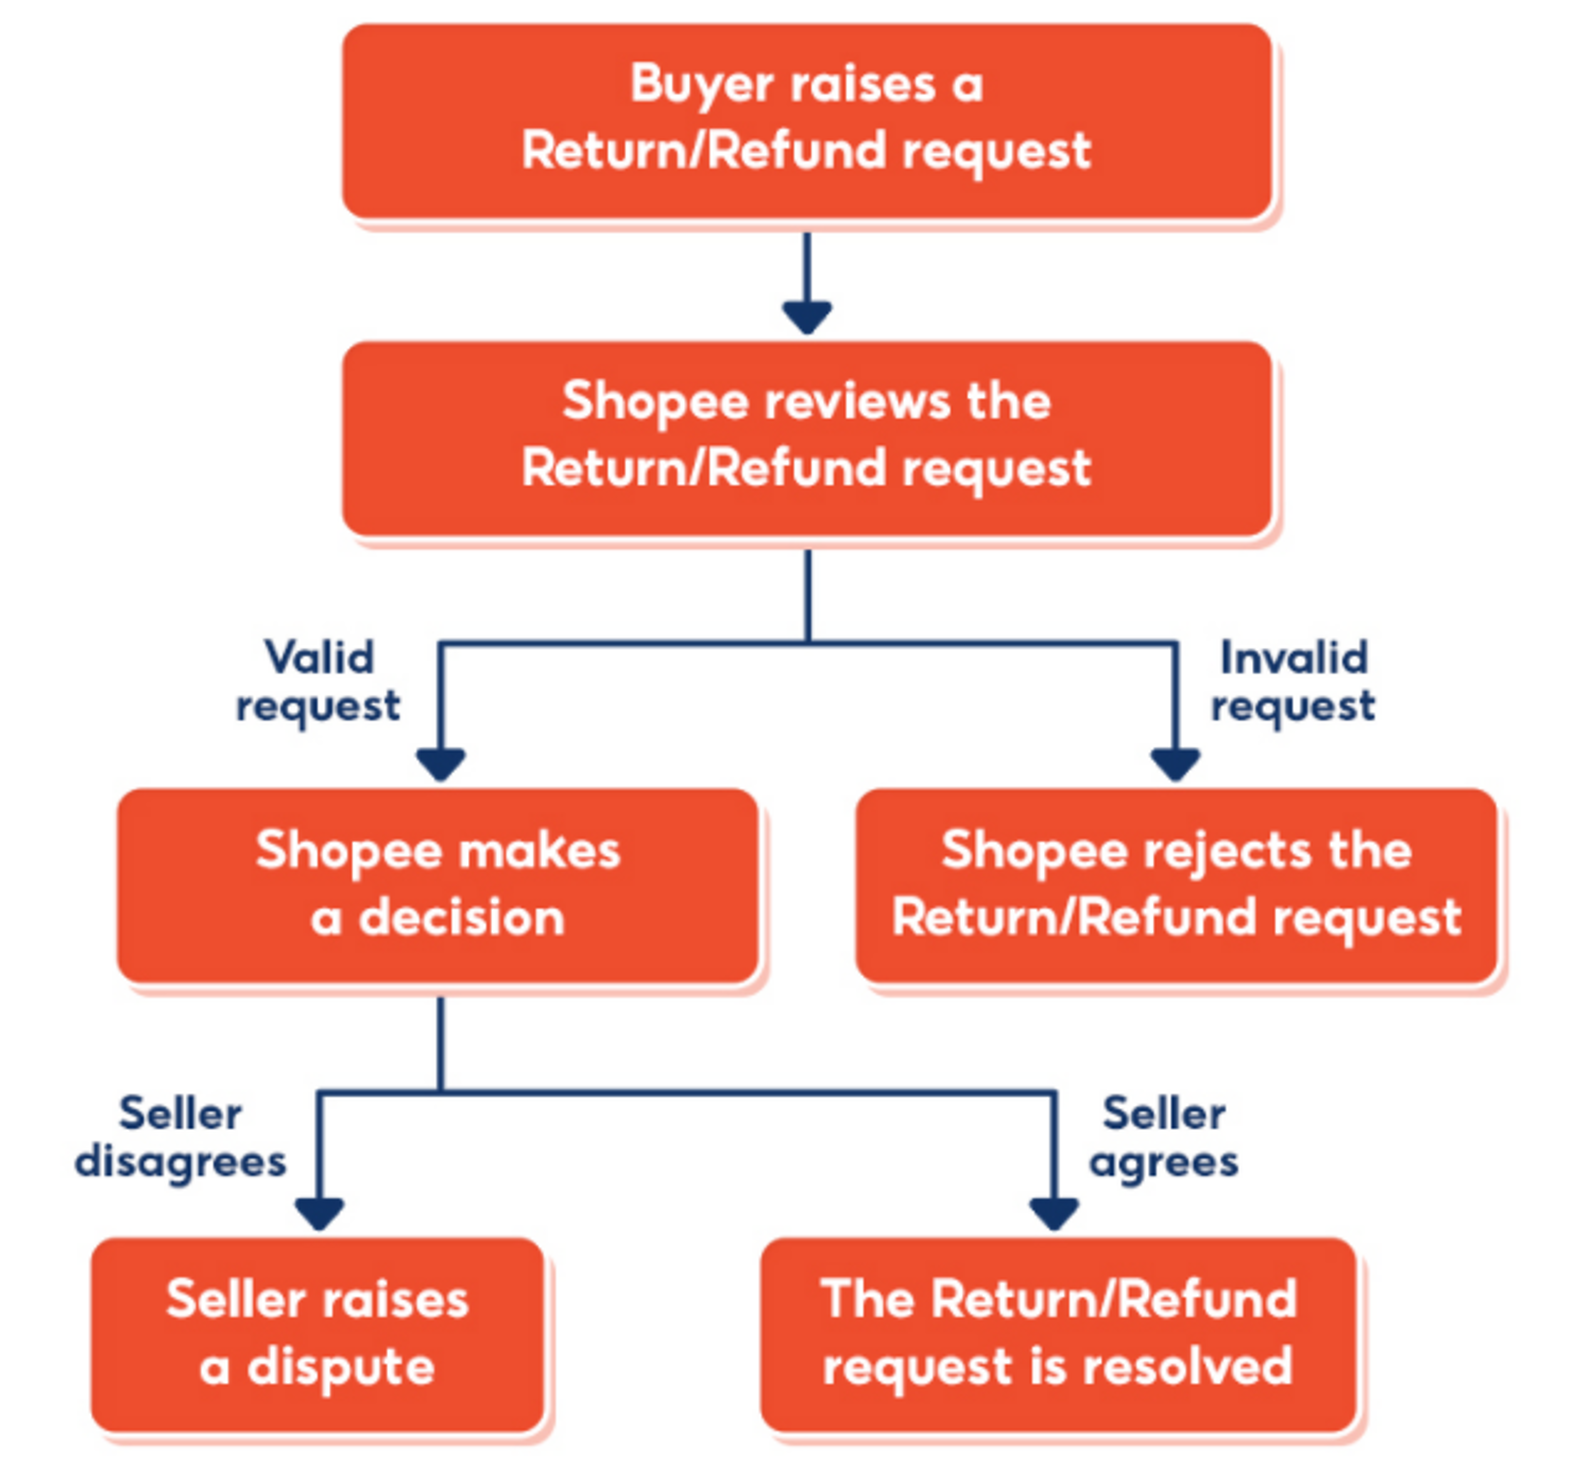 about-shopee-s-return-refund-process-shopee-my-seller-education-hub